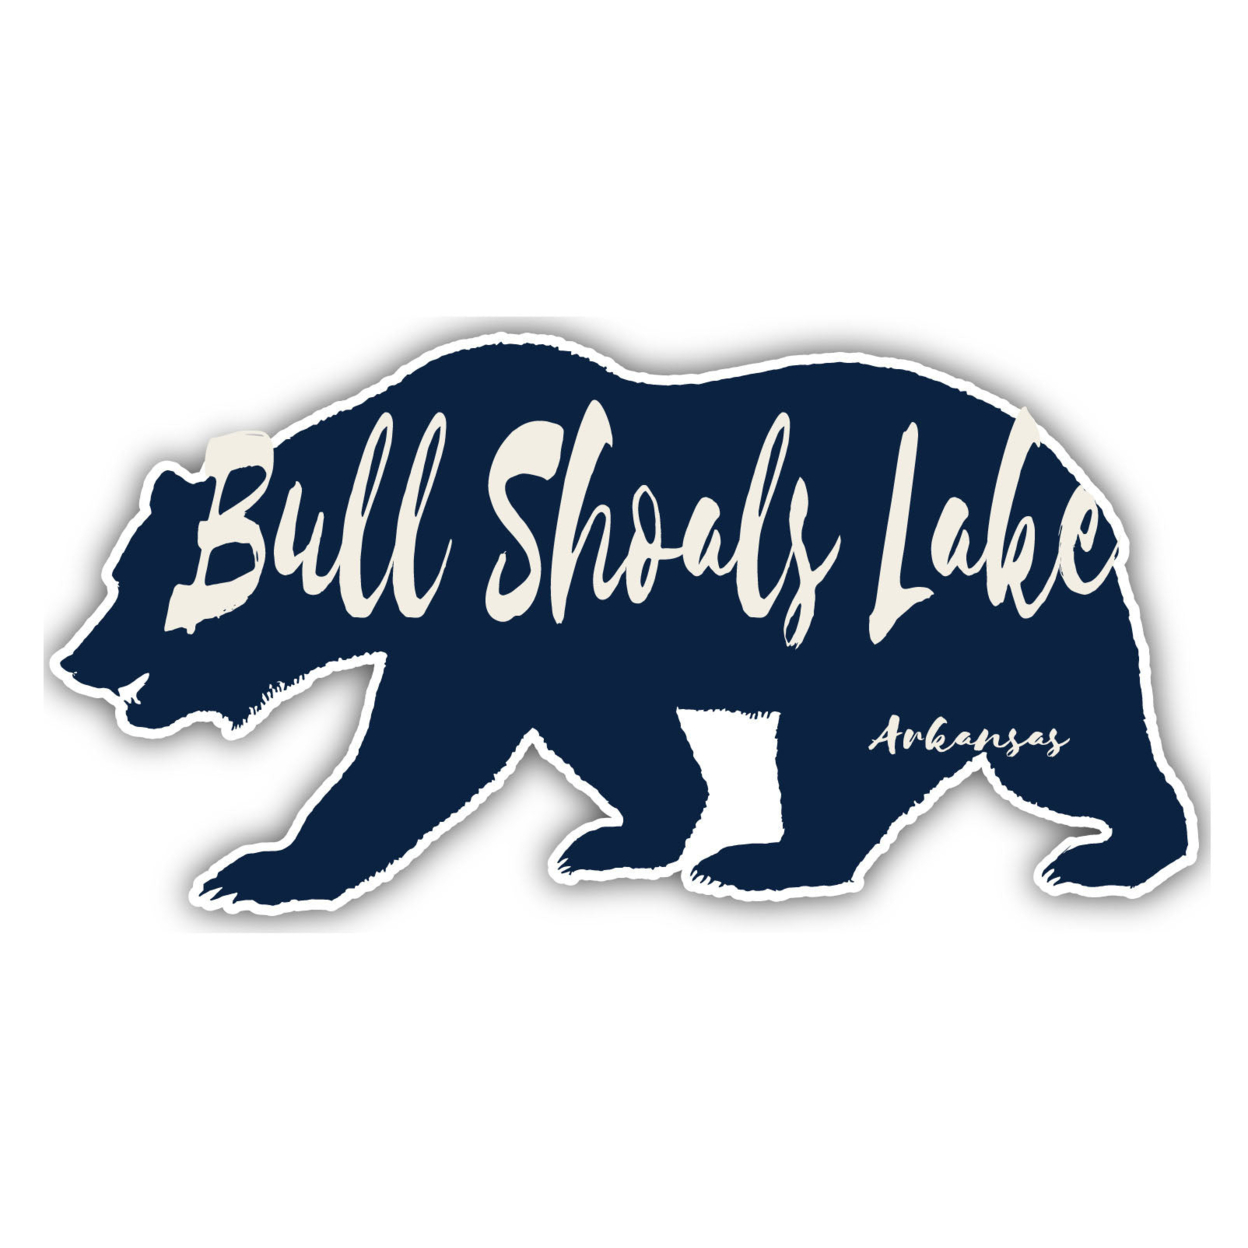 Bull Shoals Lake Arkansas Souvenir Decorative Stickers (Choose Theme And Size) - 4-Pack, 2-Inch, Camp Life